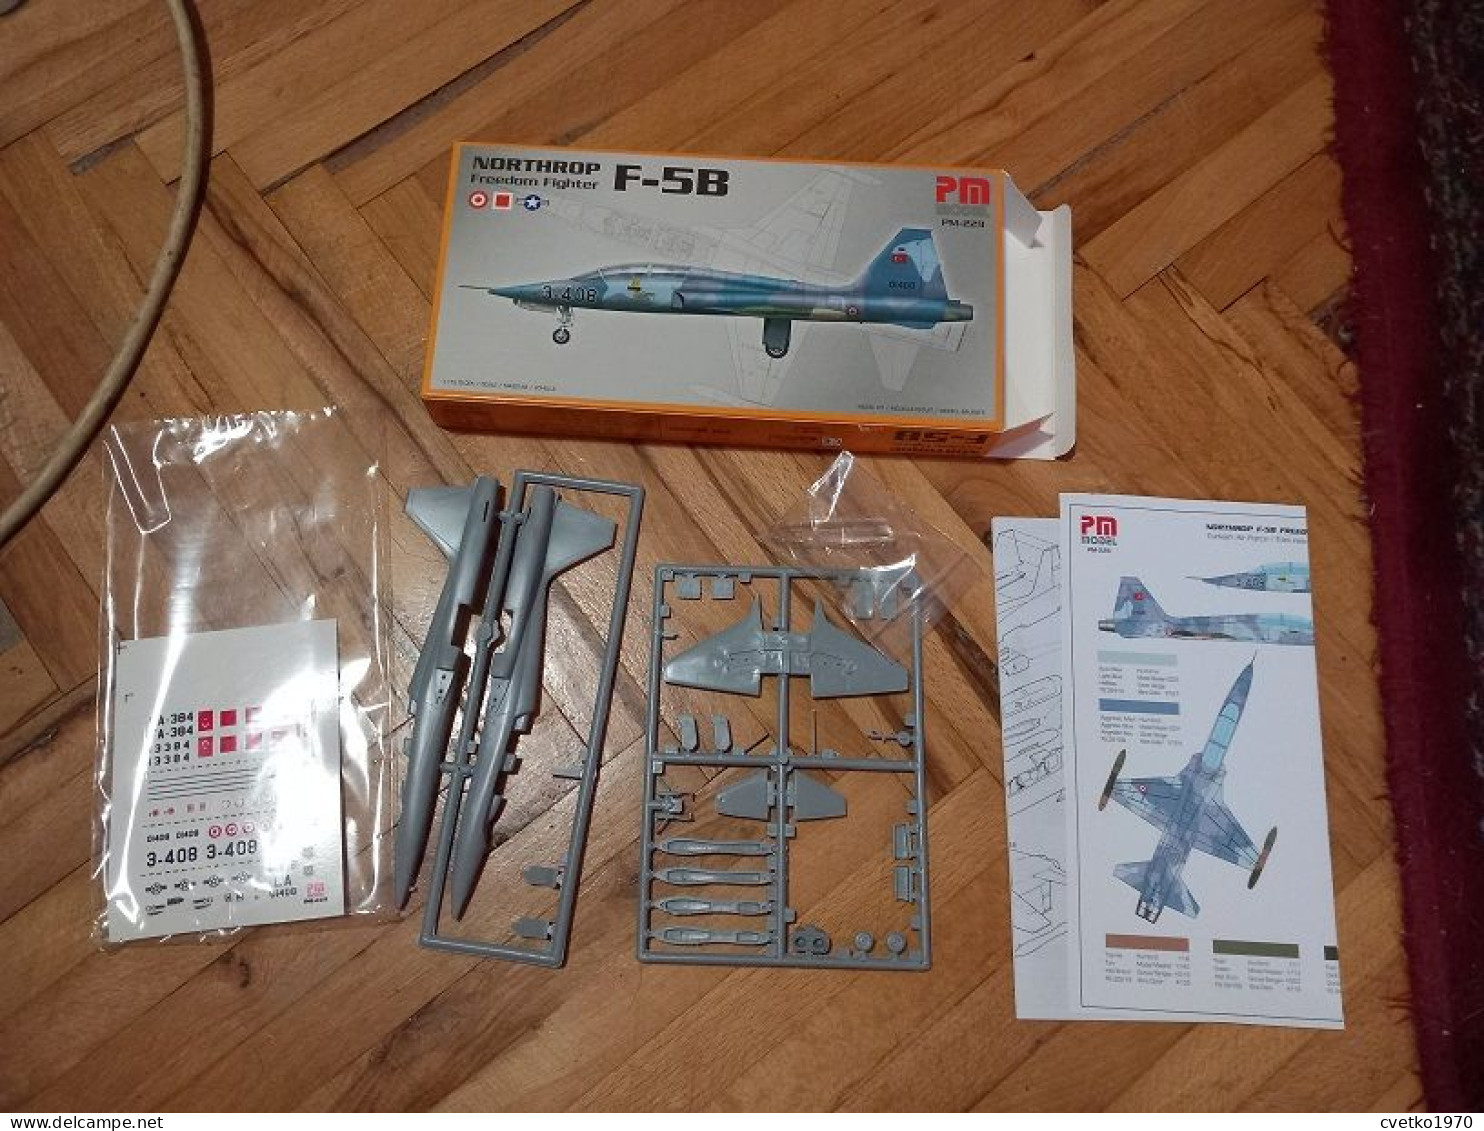 Northrop F-5B Freedom Figher, 1/72, PM Model Turkey (free International Shipping) - Airplanes & Helicopters